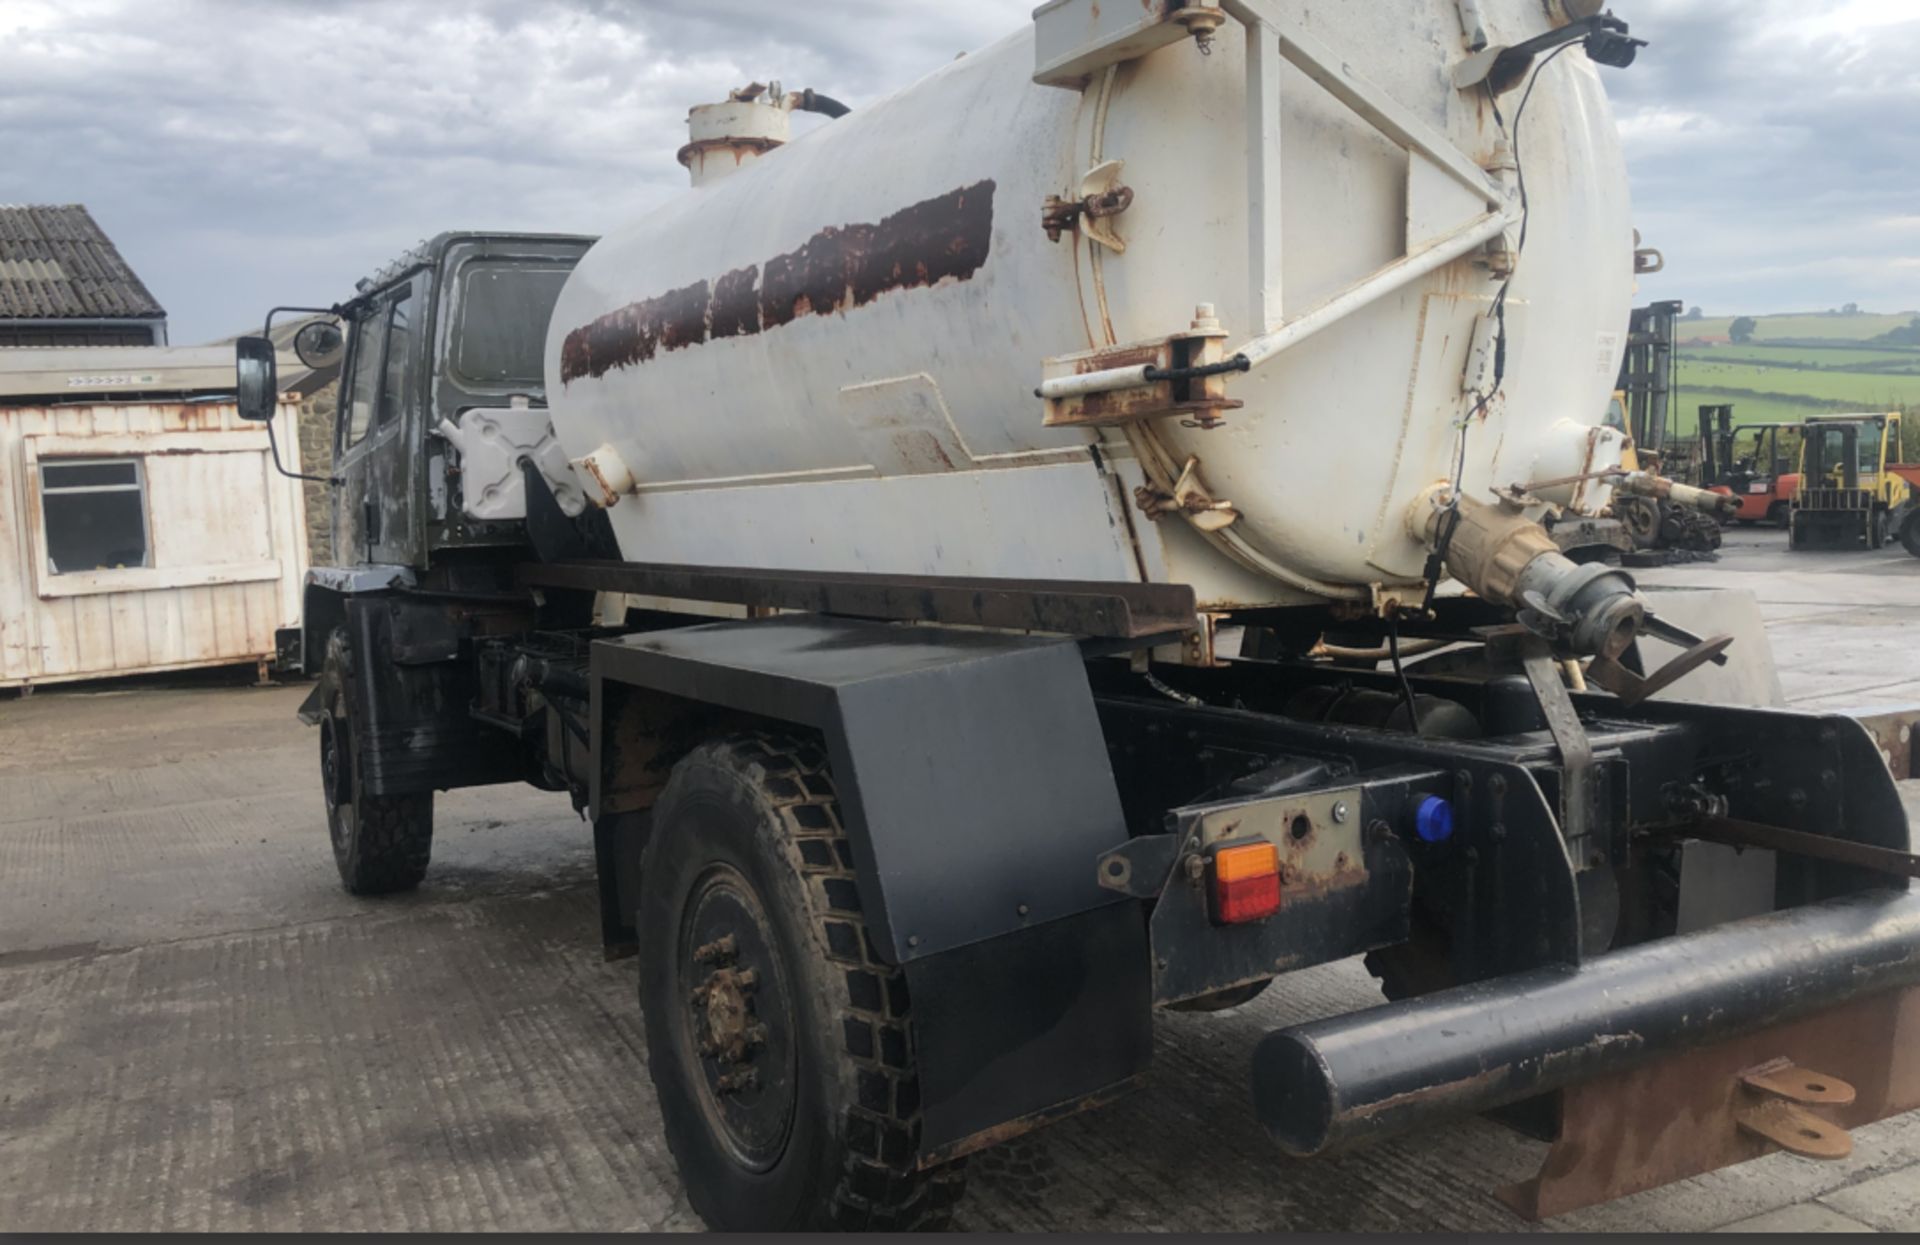 DAF T45 ,4×4 WATER BOWSER TRUCK - Image 10 of 10